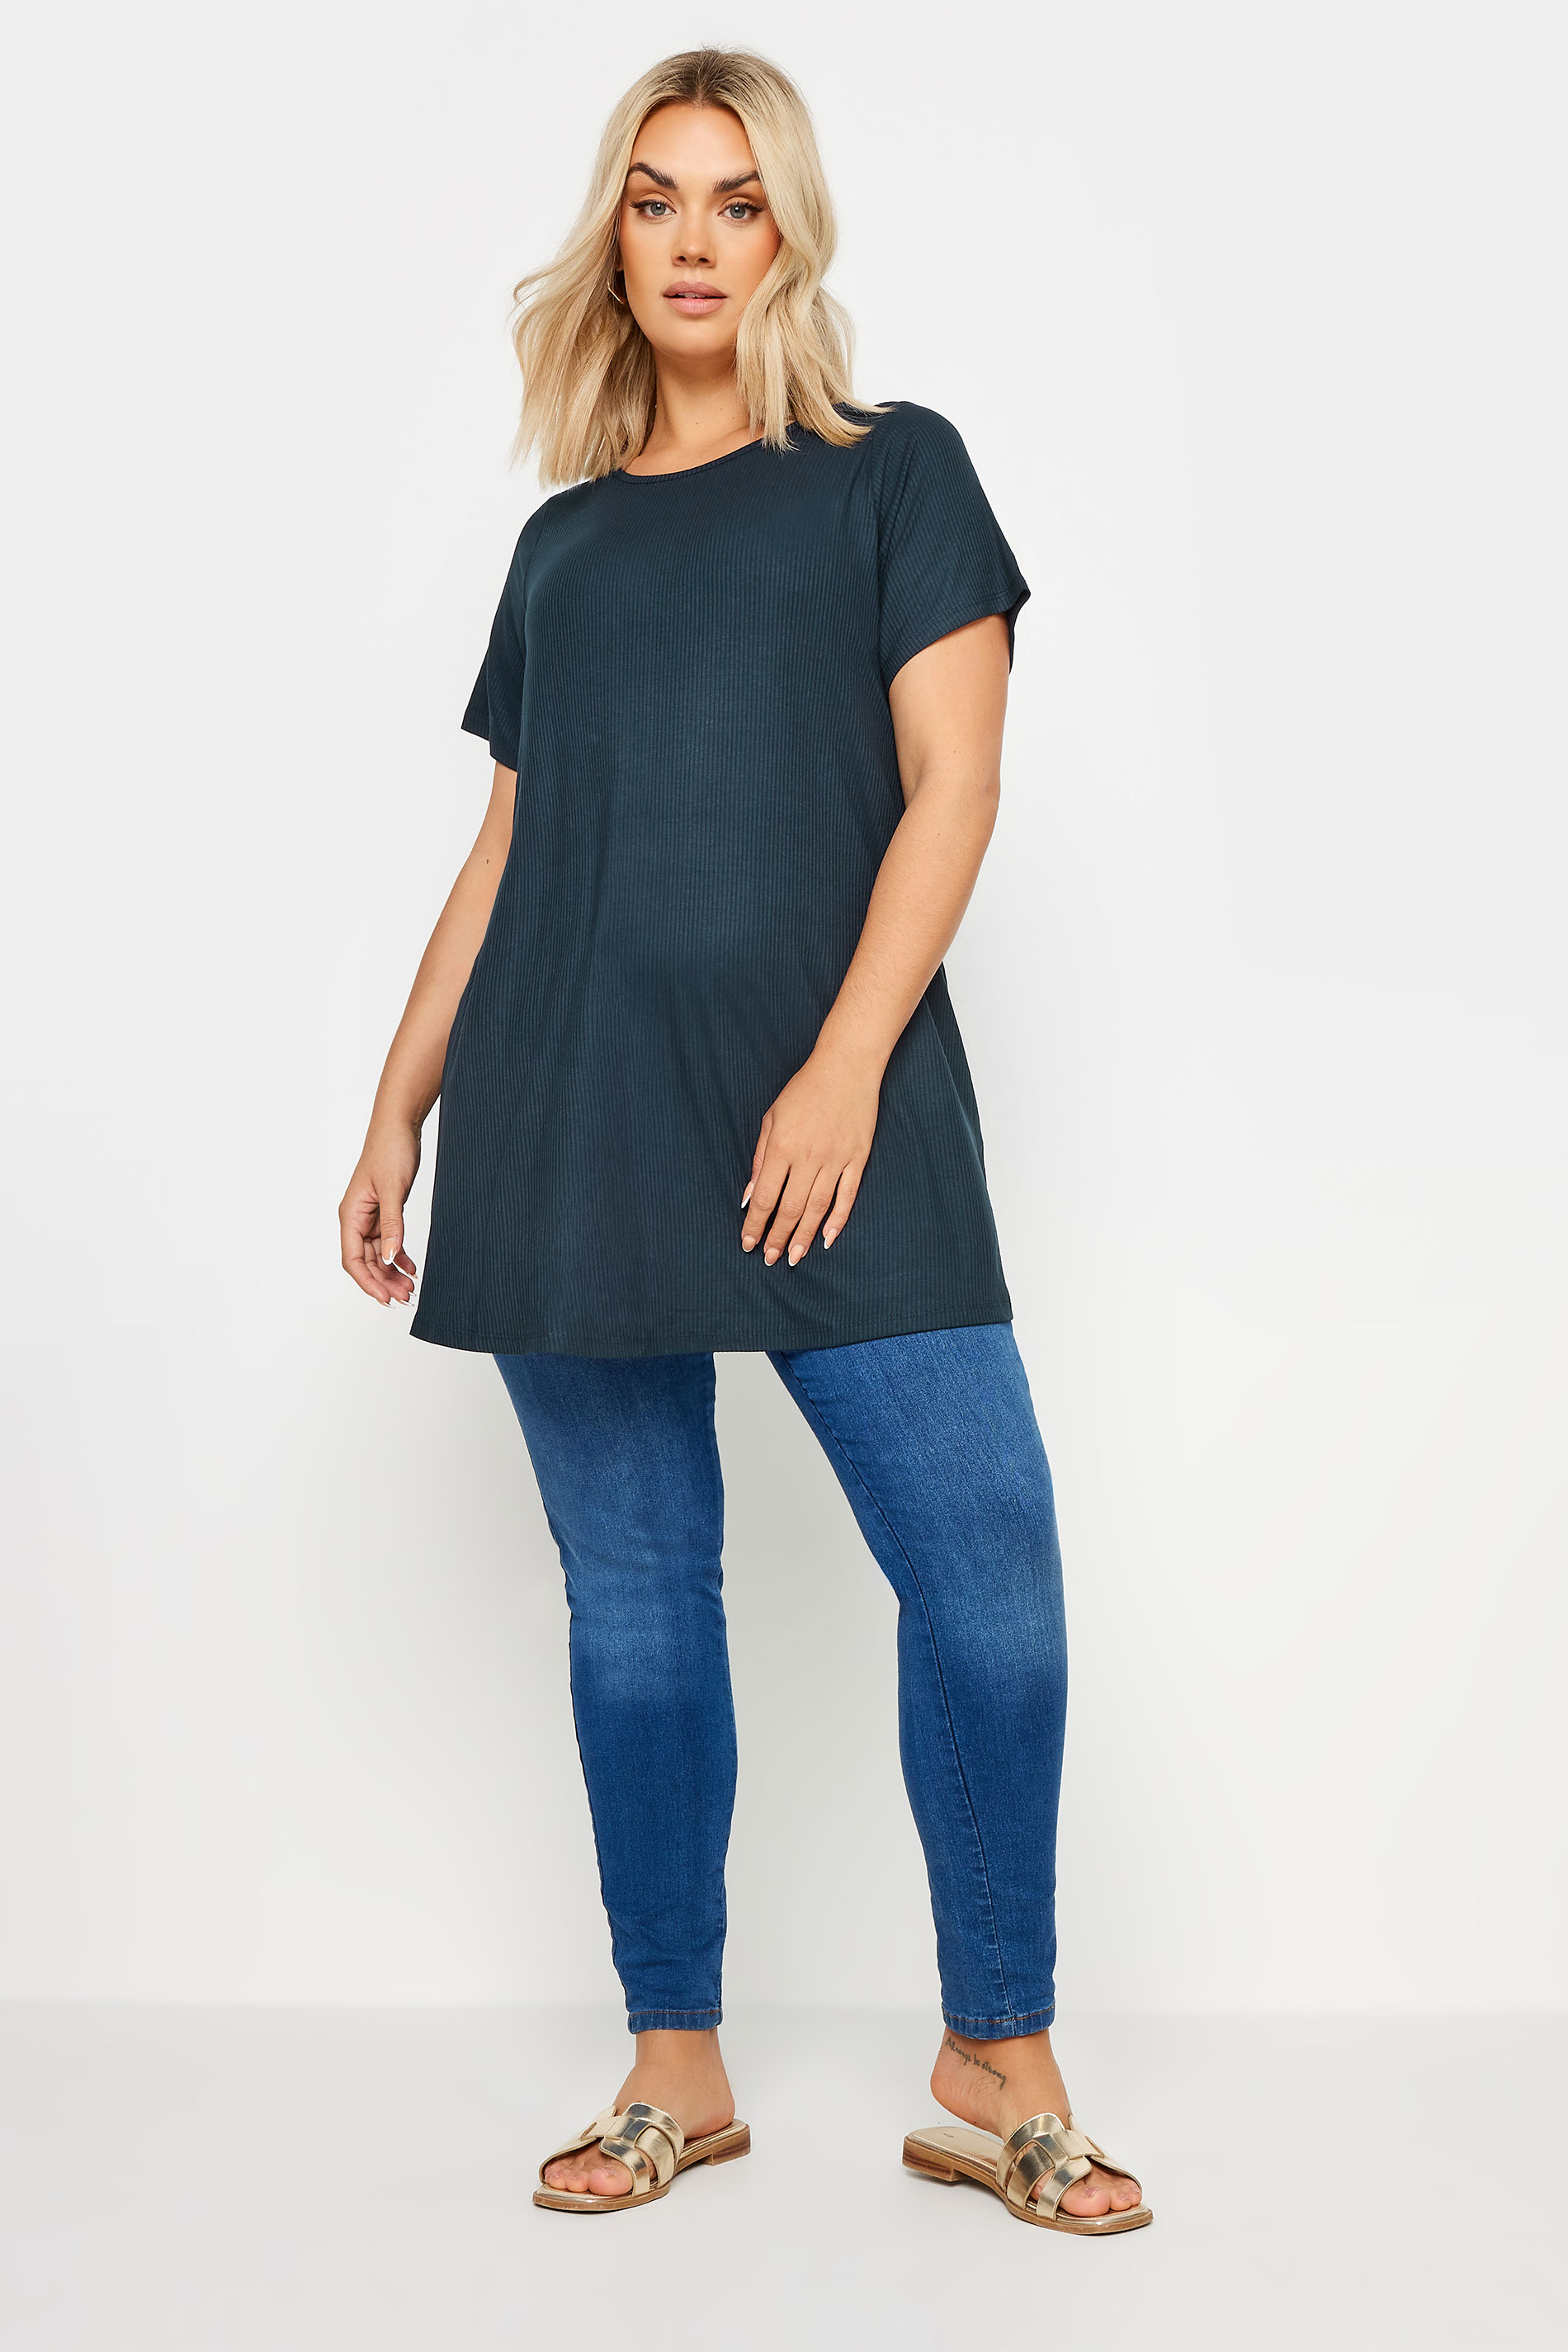 Plus Size Navy Blue Ribbed Swing Top | Yours Clothing 2